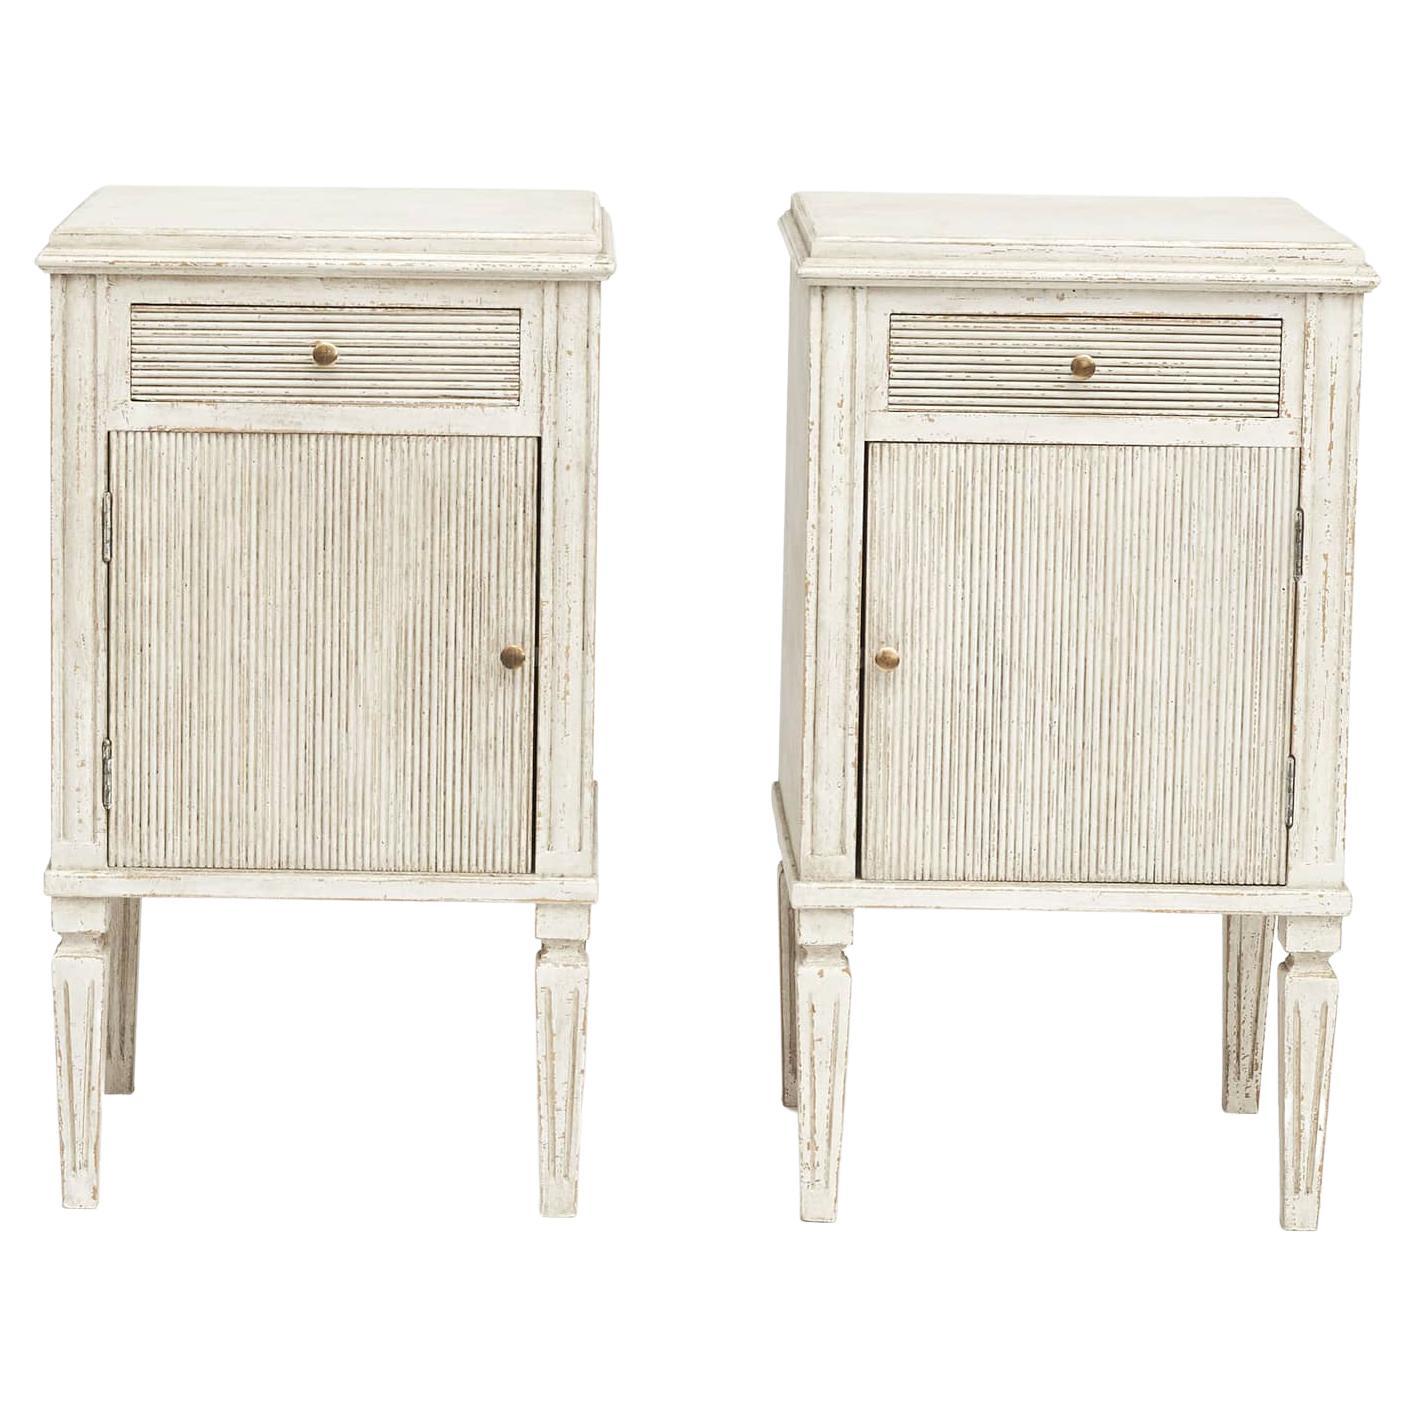 Pair Of Swedish Nightstands Or Bedside Cabinets, Gustavian Style